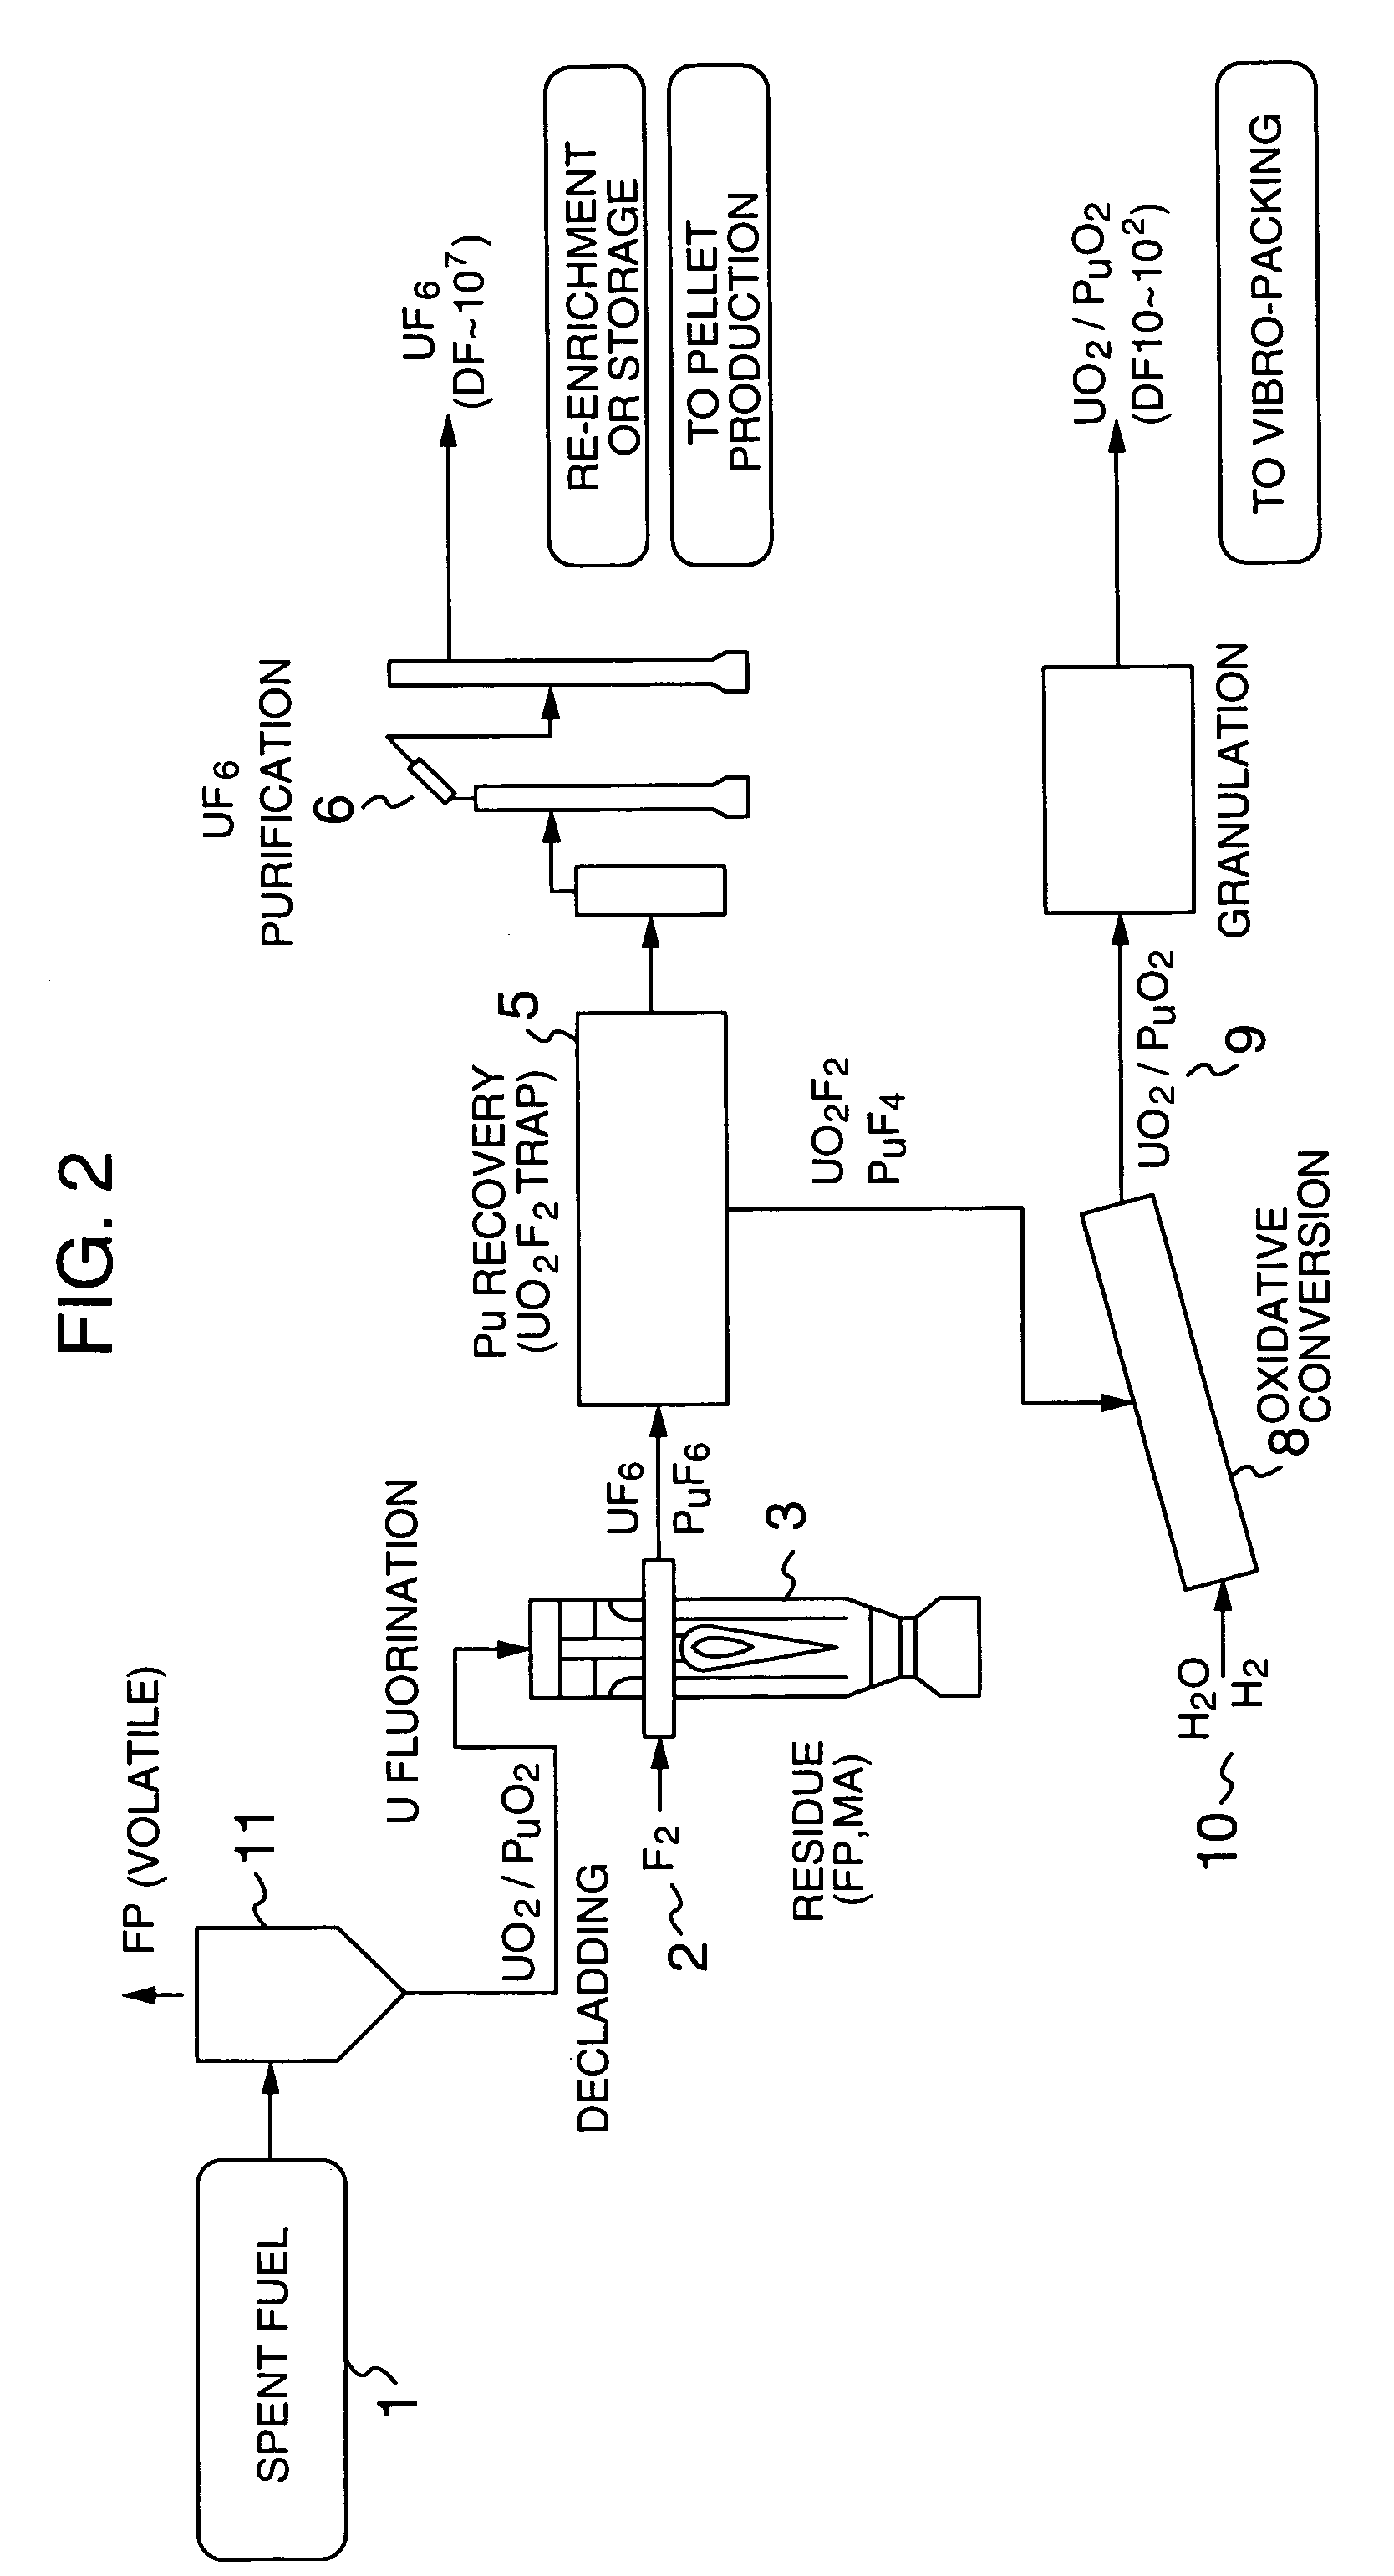 Method for reprocessing spent nuclear fuel